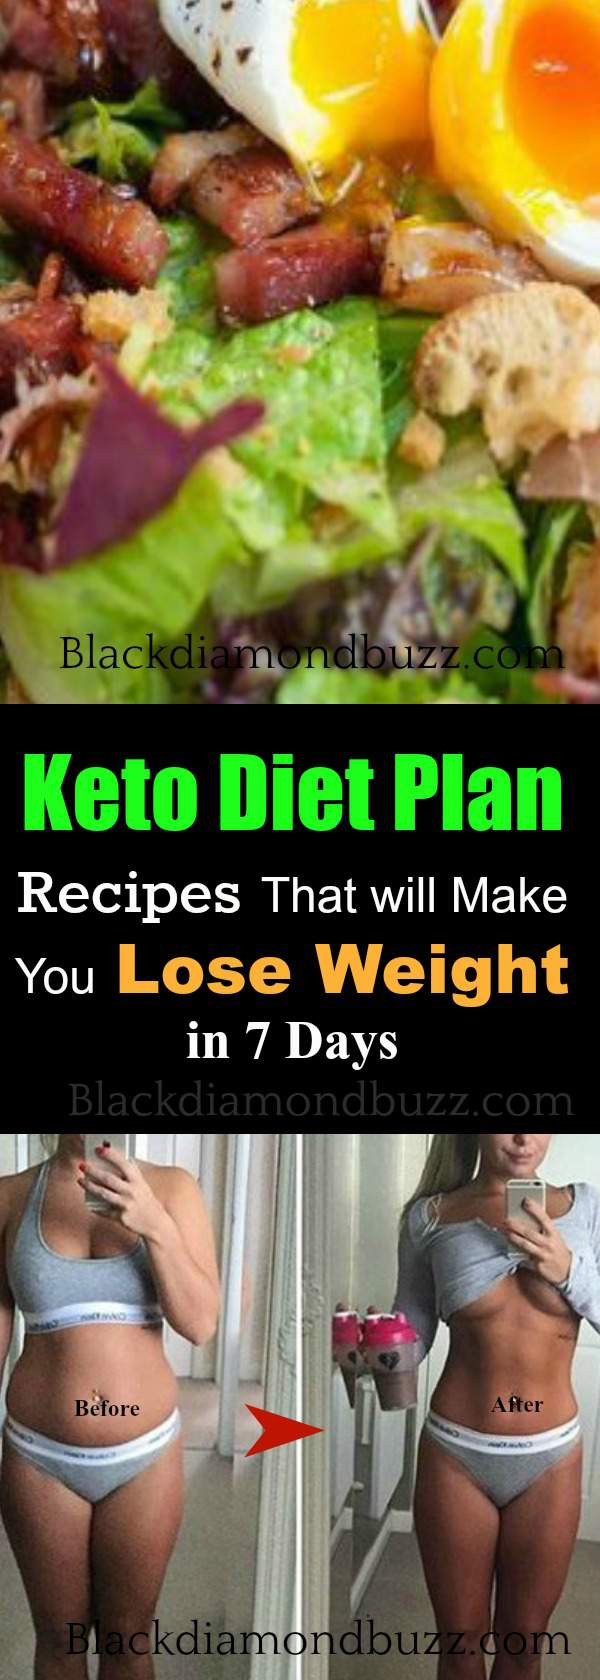 Keto Diet First Week Weight Loss
 Keto Diet Plan Recipes That Will Make You Lose Weight in 7